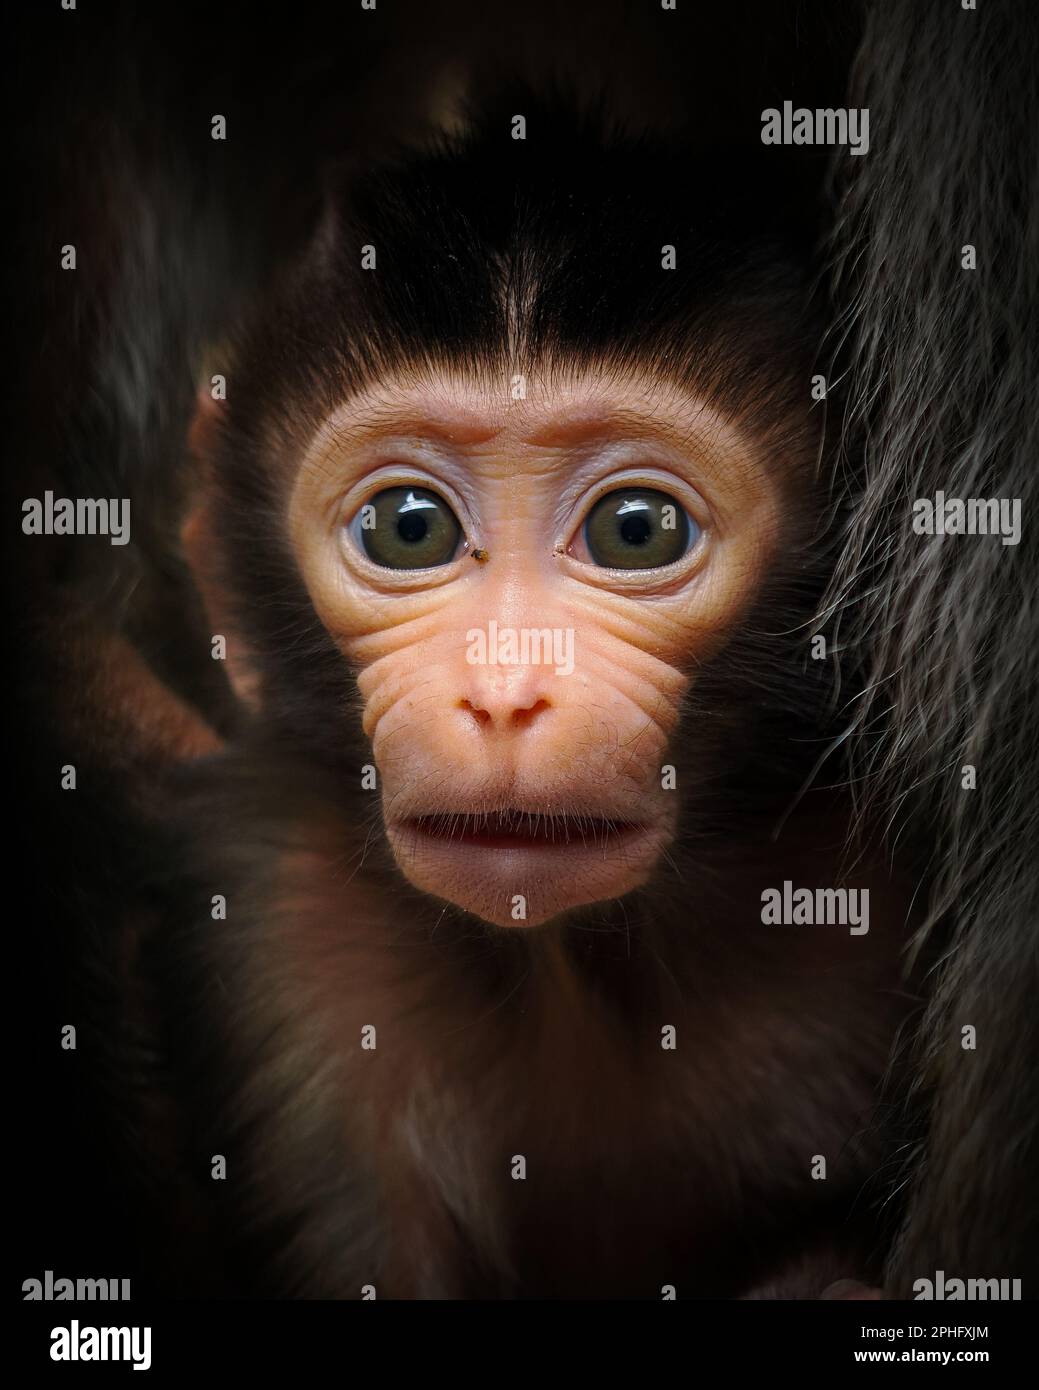 Looking shocked. Indonesia: THESE ADORABLE images show a newborn baby macaque monkey smiling at the photographer and pulling faces as it explores the Stock Photo